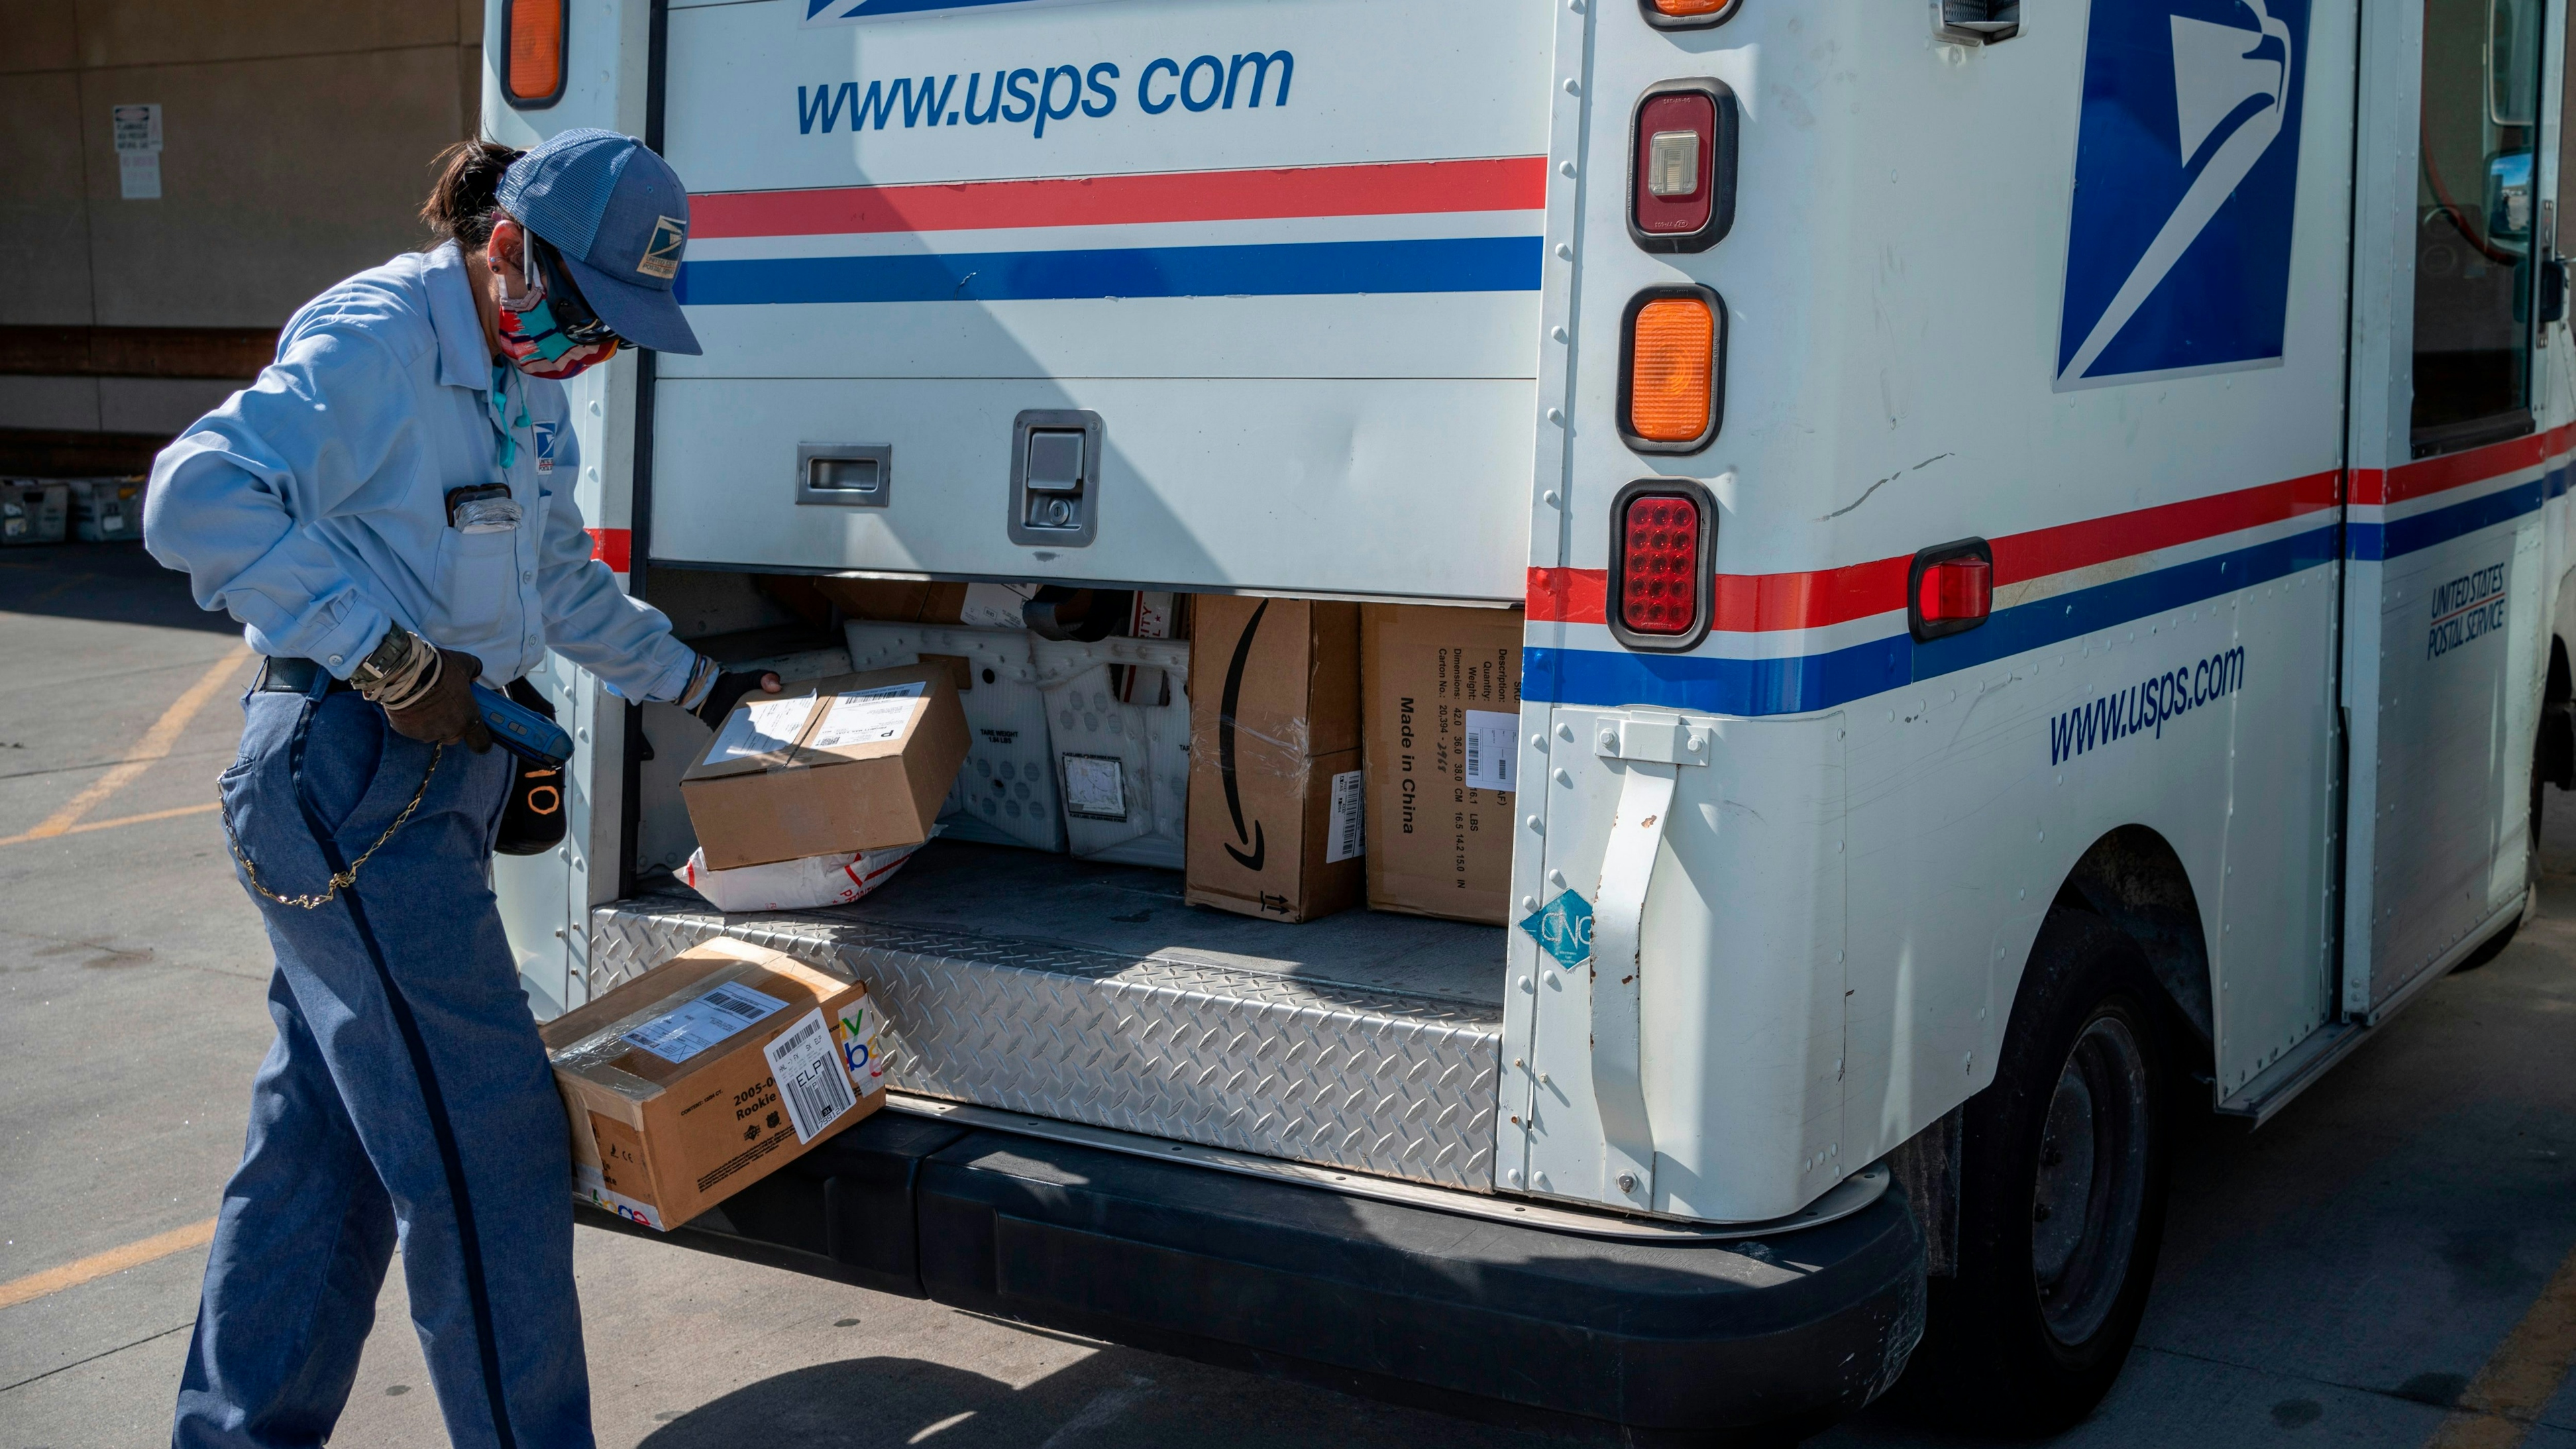 United States Postal Service mail carrier Lizette Portugal finishes up loading her truck